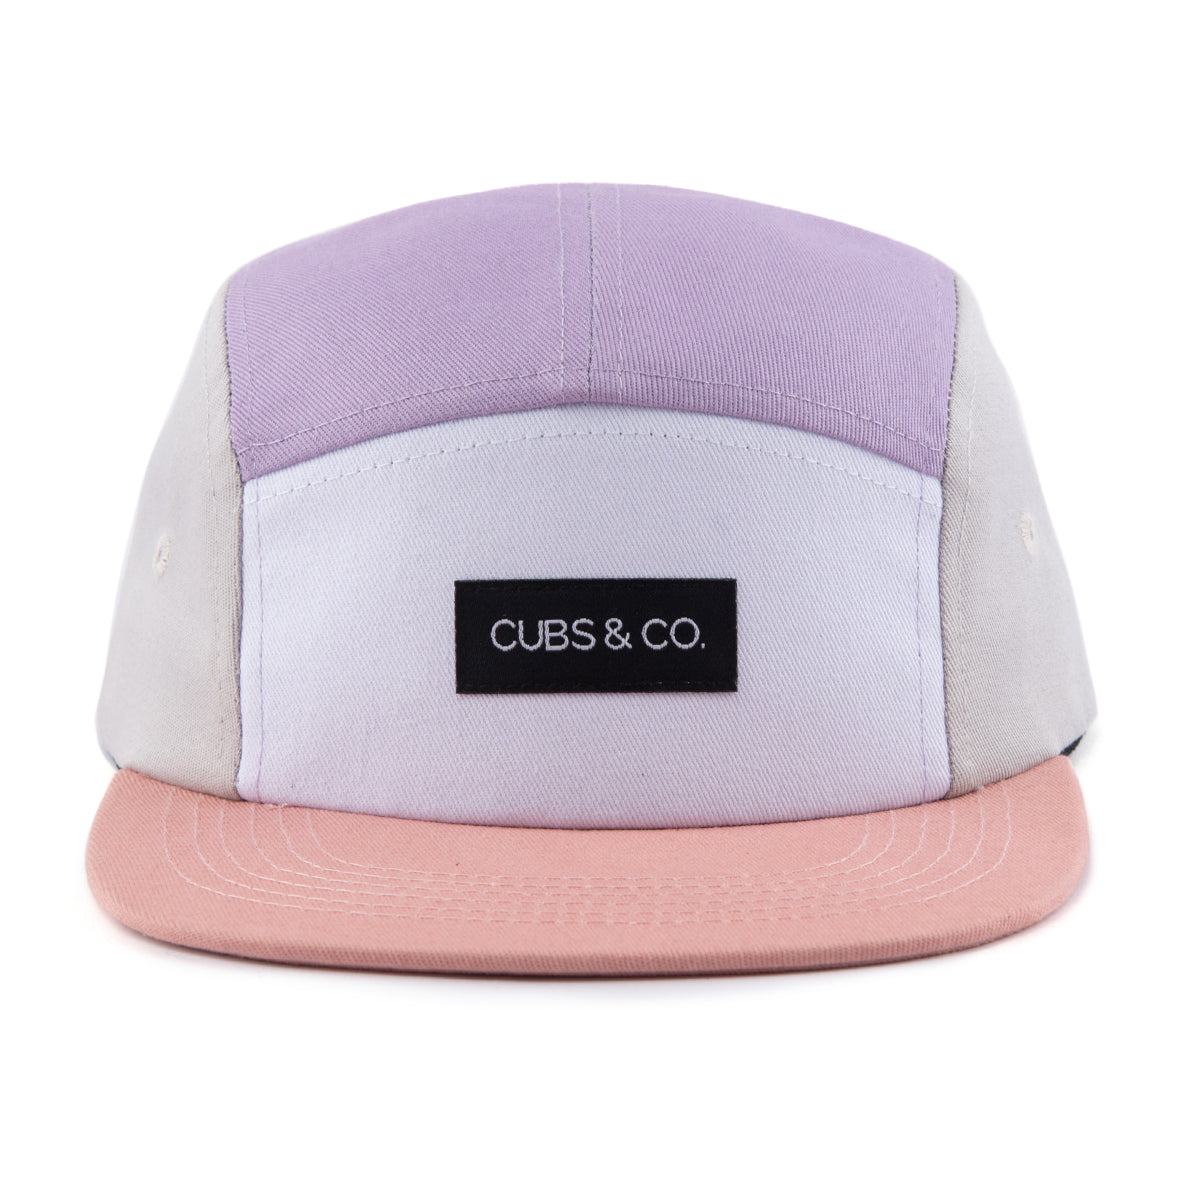 Retro Pink 5 Panel: Available in Baby - Adult Sizes - Cubs & Co.